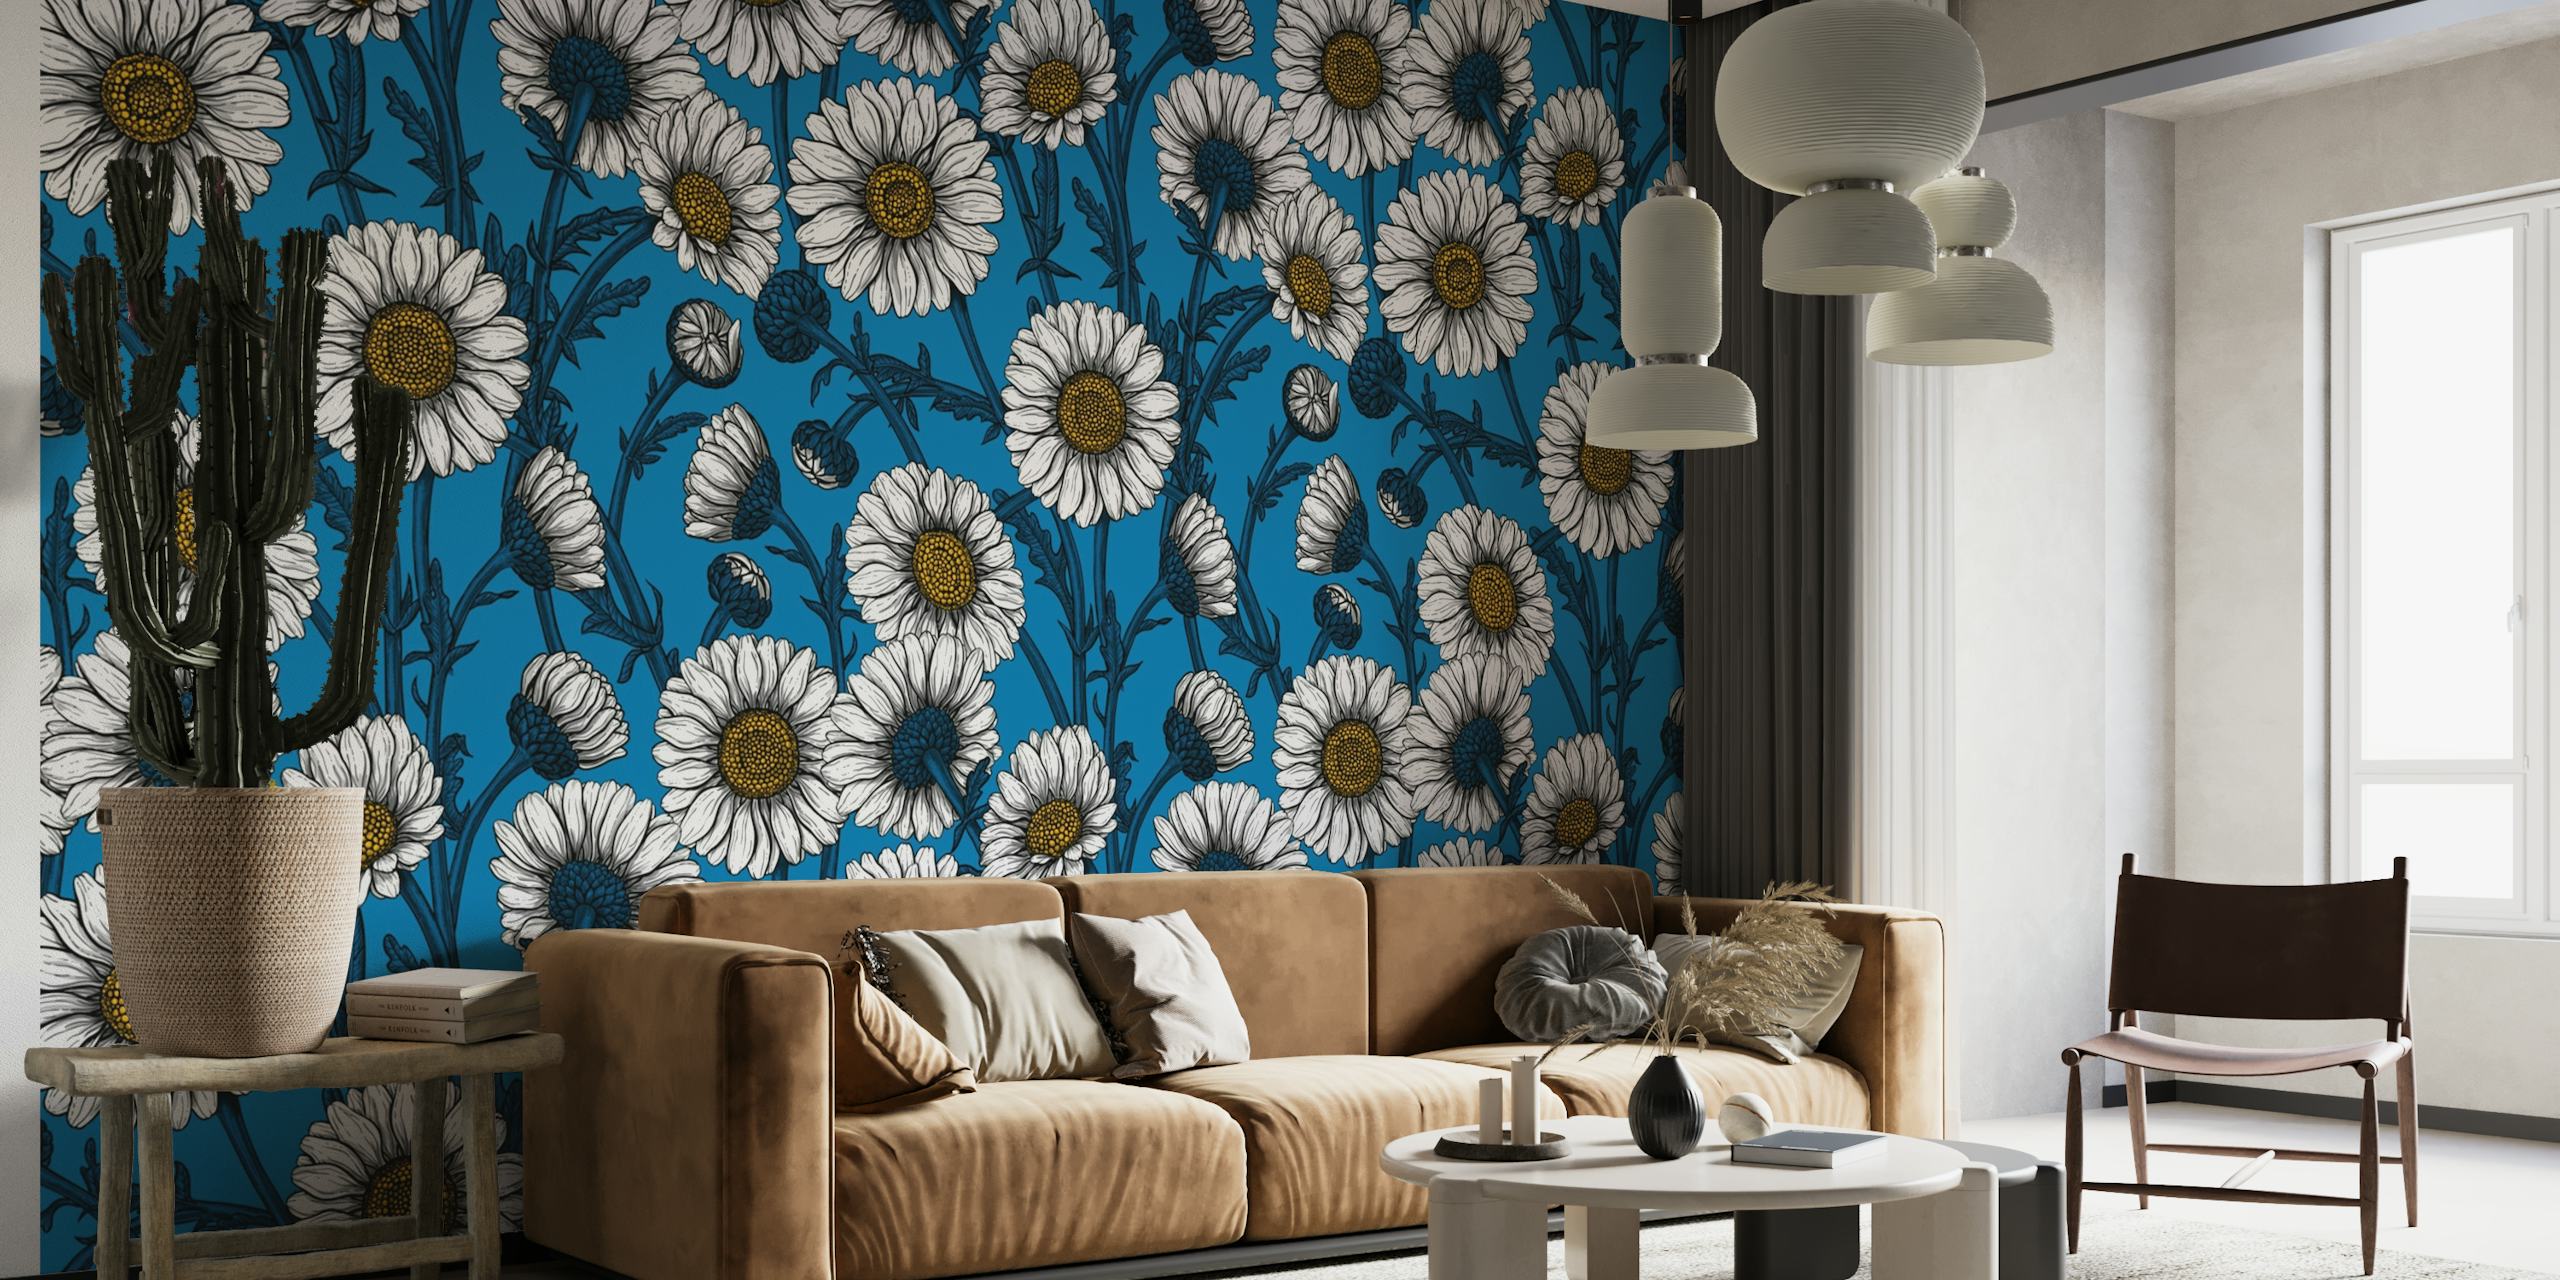 Daisies on blue behang